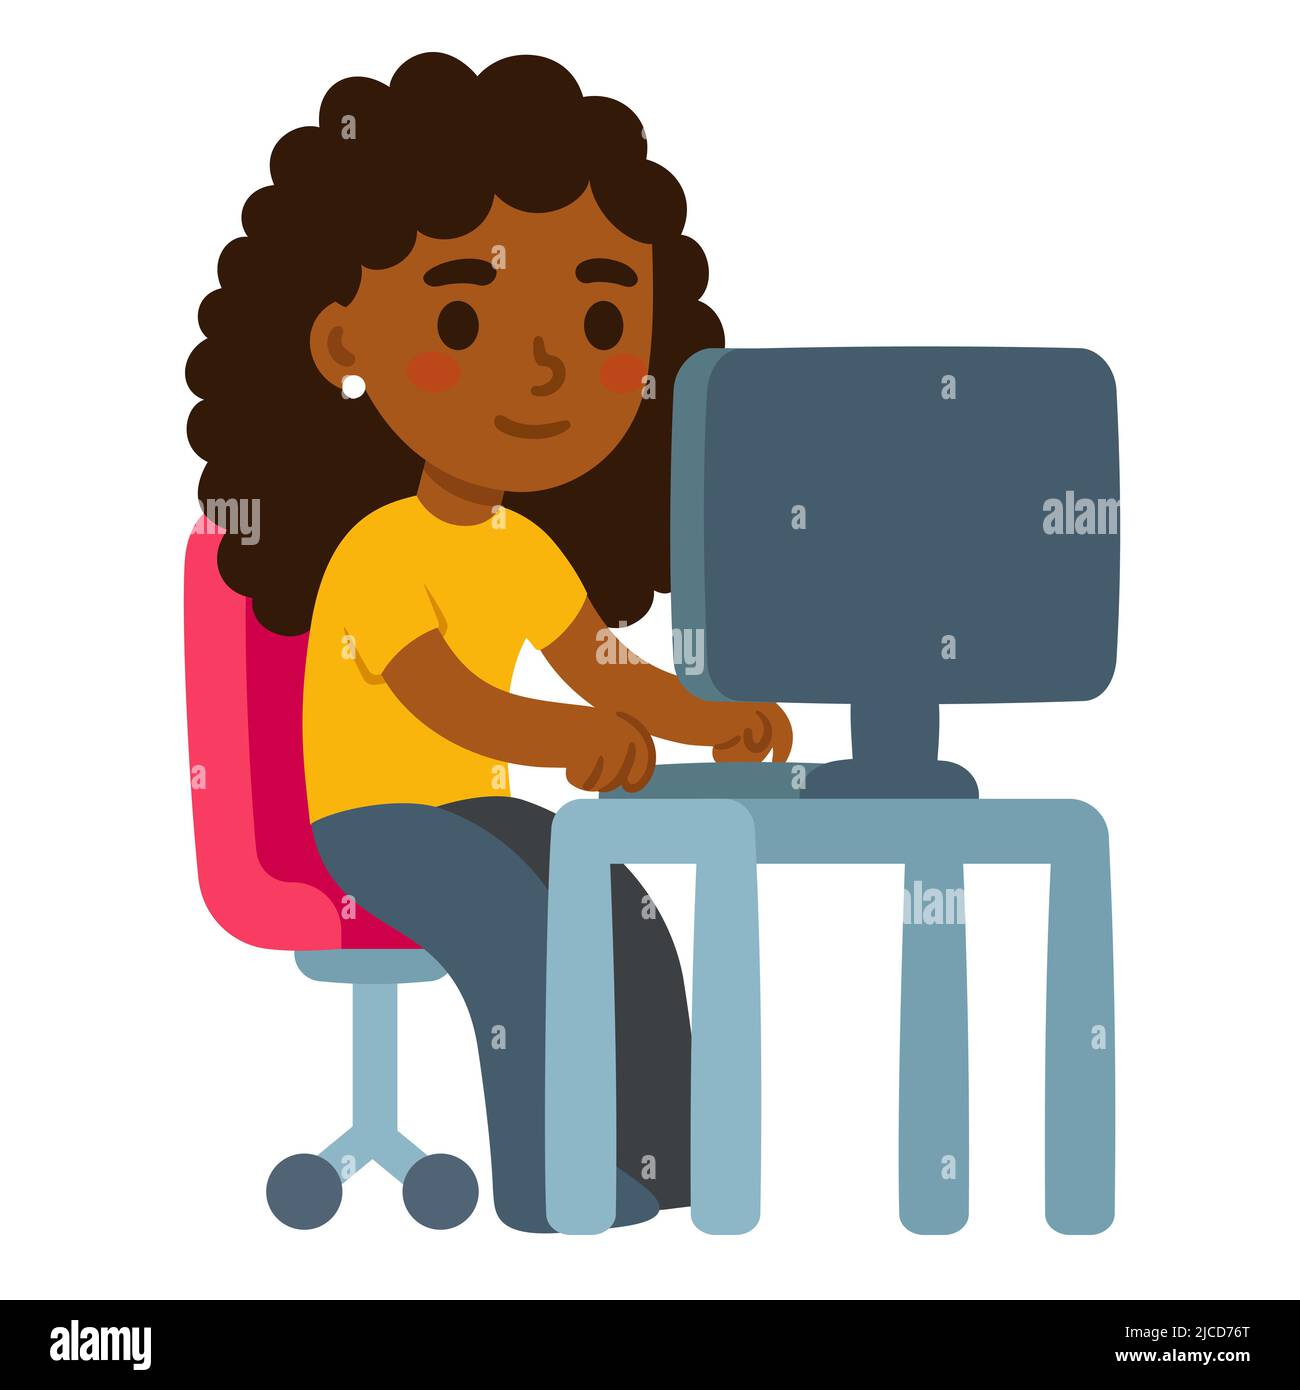 Character working on computer at office desk. Cute cartoon Black girl, student or employee. Simple flat style vector illustration. Stock Vector